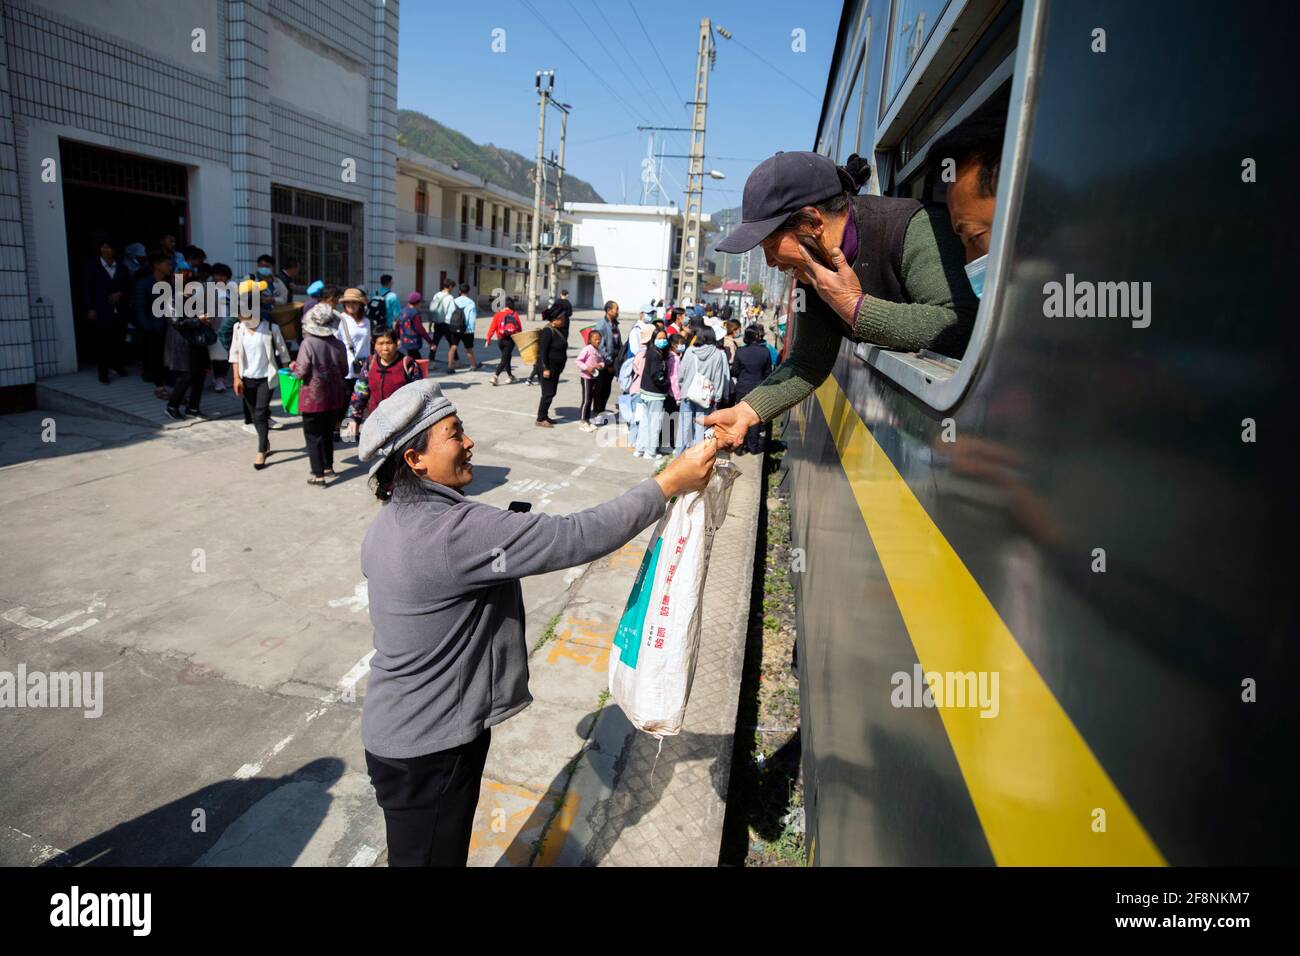 (210415) -- XICHANG, April 15, 2021 (Xinhua) -- A passenger of Yi ethnic group makes a deal with a peddler when the 5633 train stopping at a station in southwest China's Sichuan Province, April 11, 2021. As modern high-speed trains shoot past new stations throughout China, a pair of slow-speed trains still run through Daliang Mountains. The 5633/5634 trains run between Puxiong and Panzhihua of Sichuan Province with an average speed less than 40 km per hour. The journey with 26 stations in between takes eleven hours and four minutes, with the ticket prices ranging from 2 yuan to 25.5 yuan(abo Stock Photo